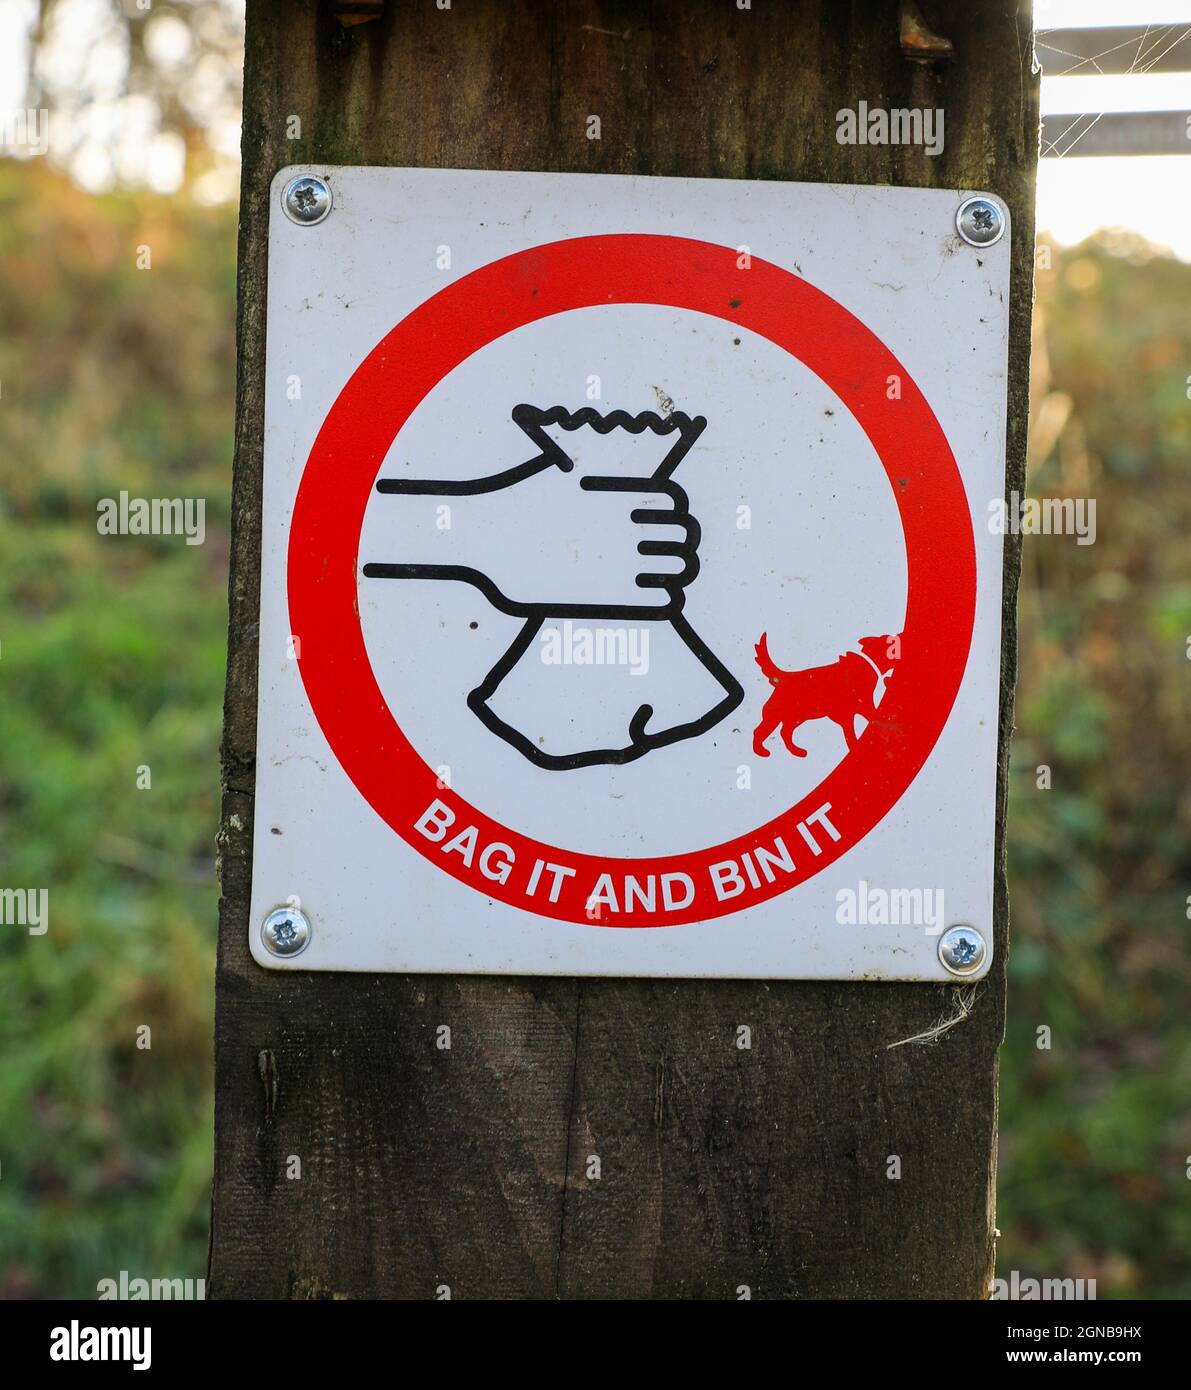 A sign on a wooden post saying 'bag it and bin it' regarding dog waste, England, UK Stock Photo